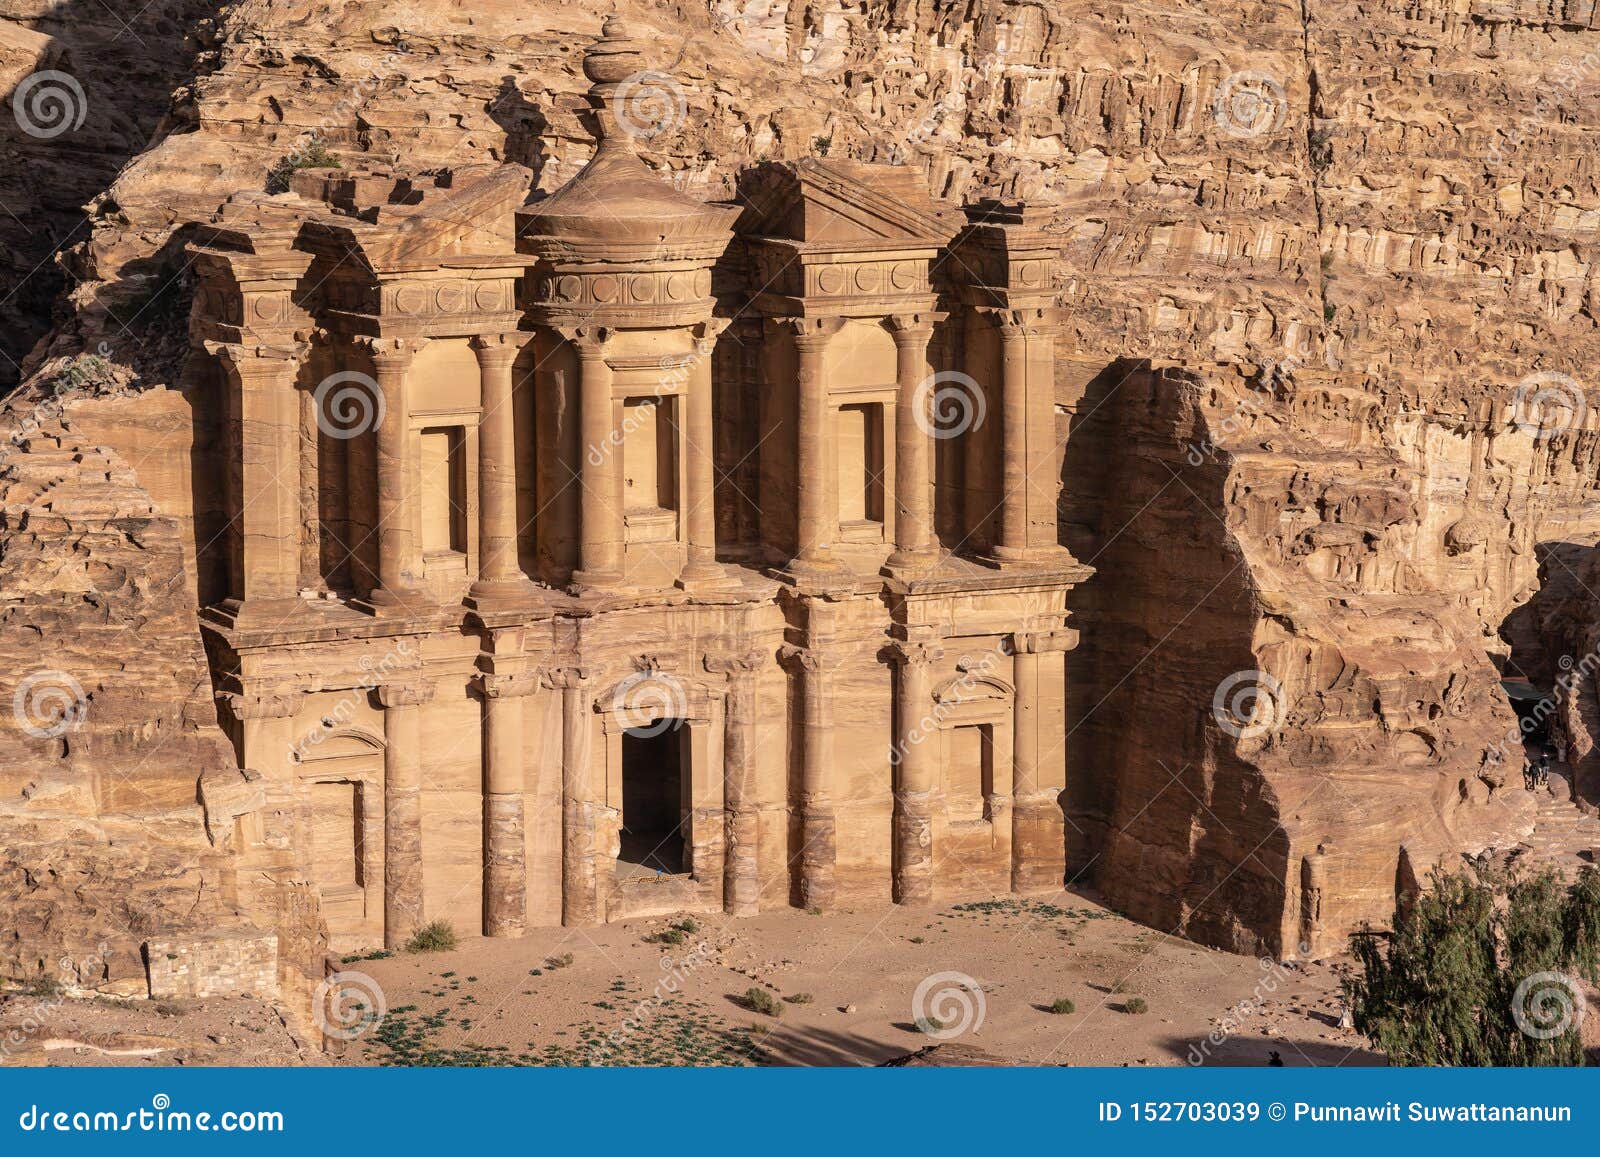 The Monastery in Petra Ancient City, One of Seven Wonders in the World, Jordan, Middle East Stock Image - of cliff: 152703039